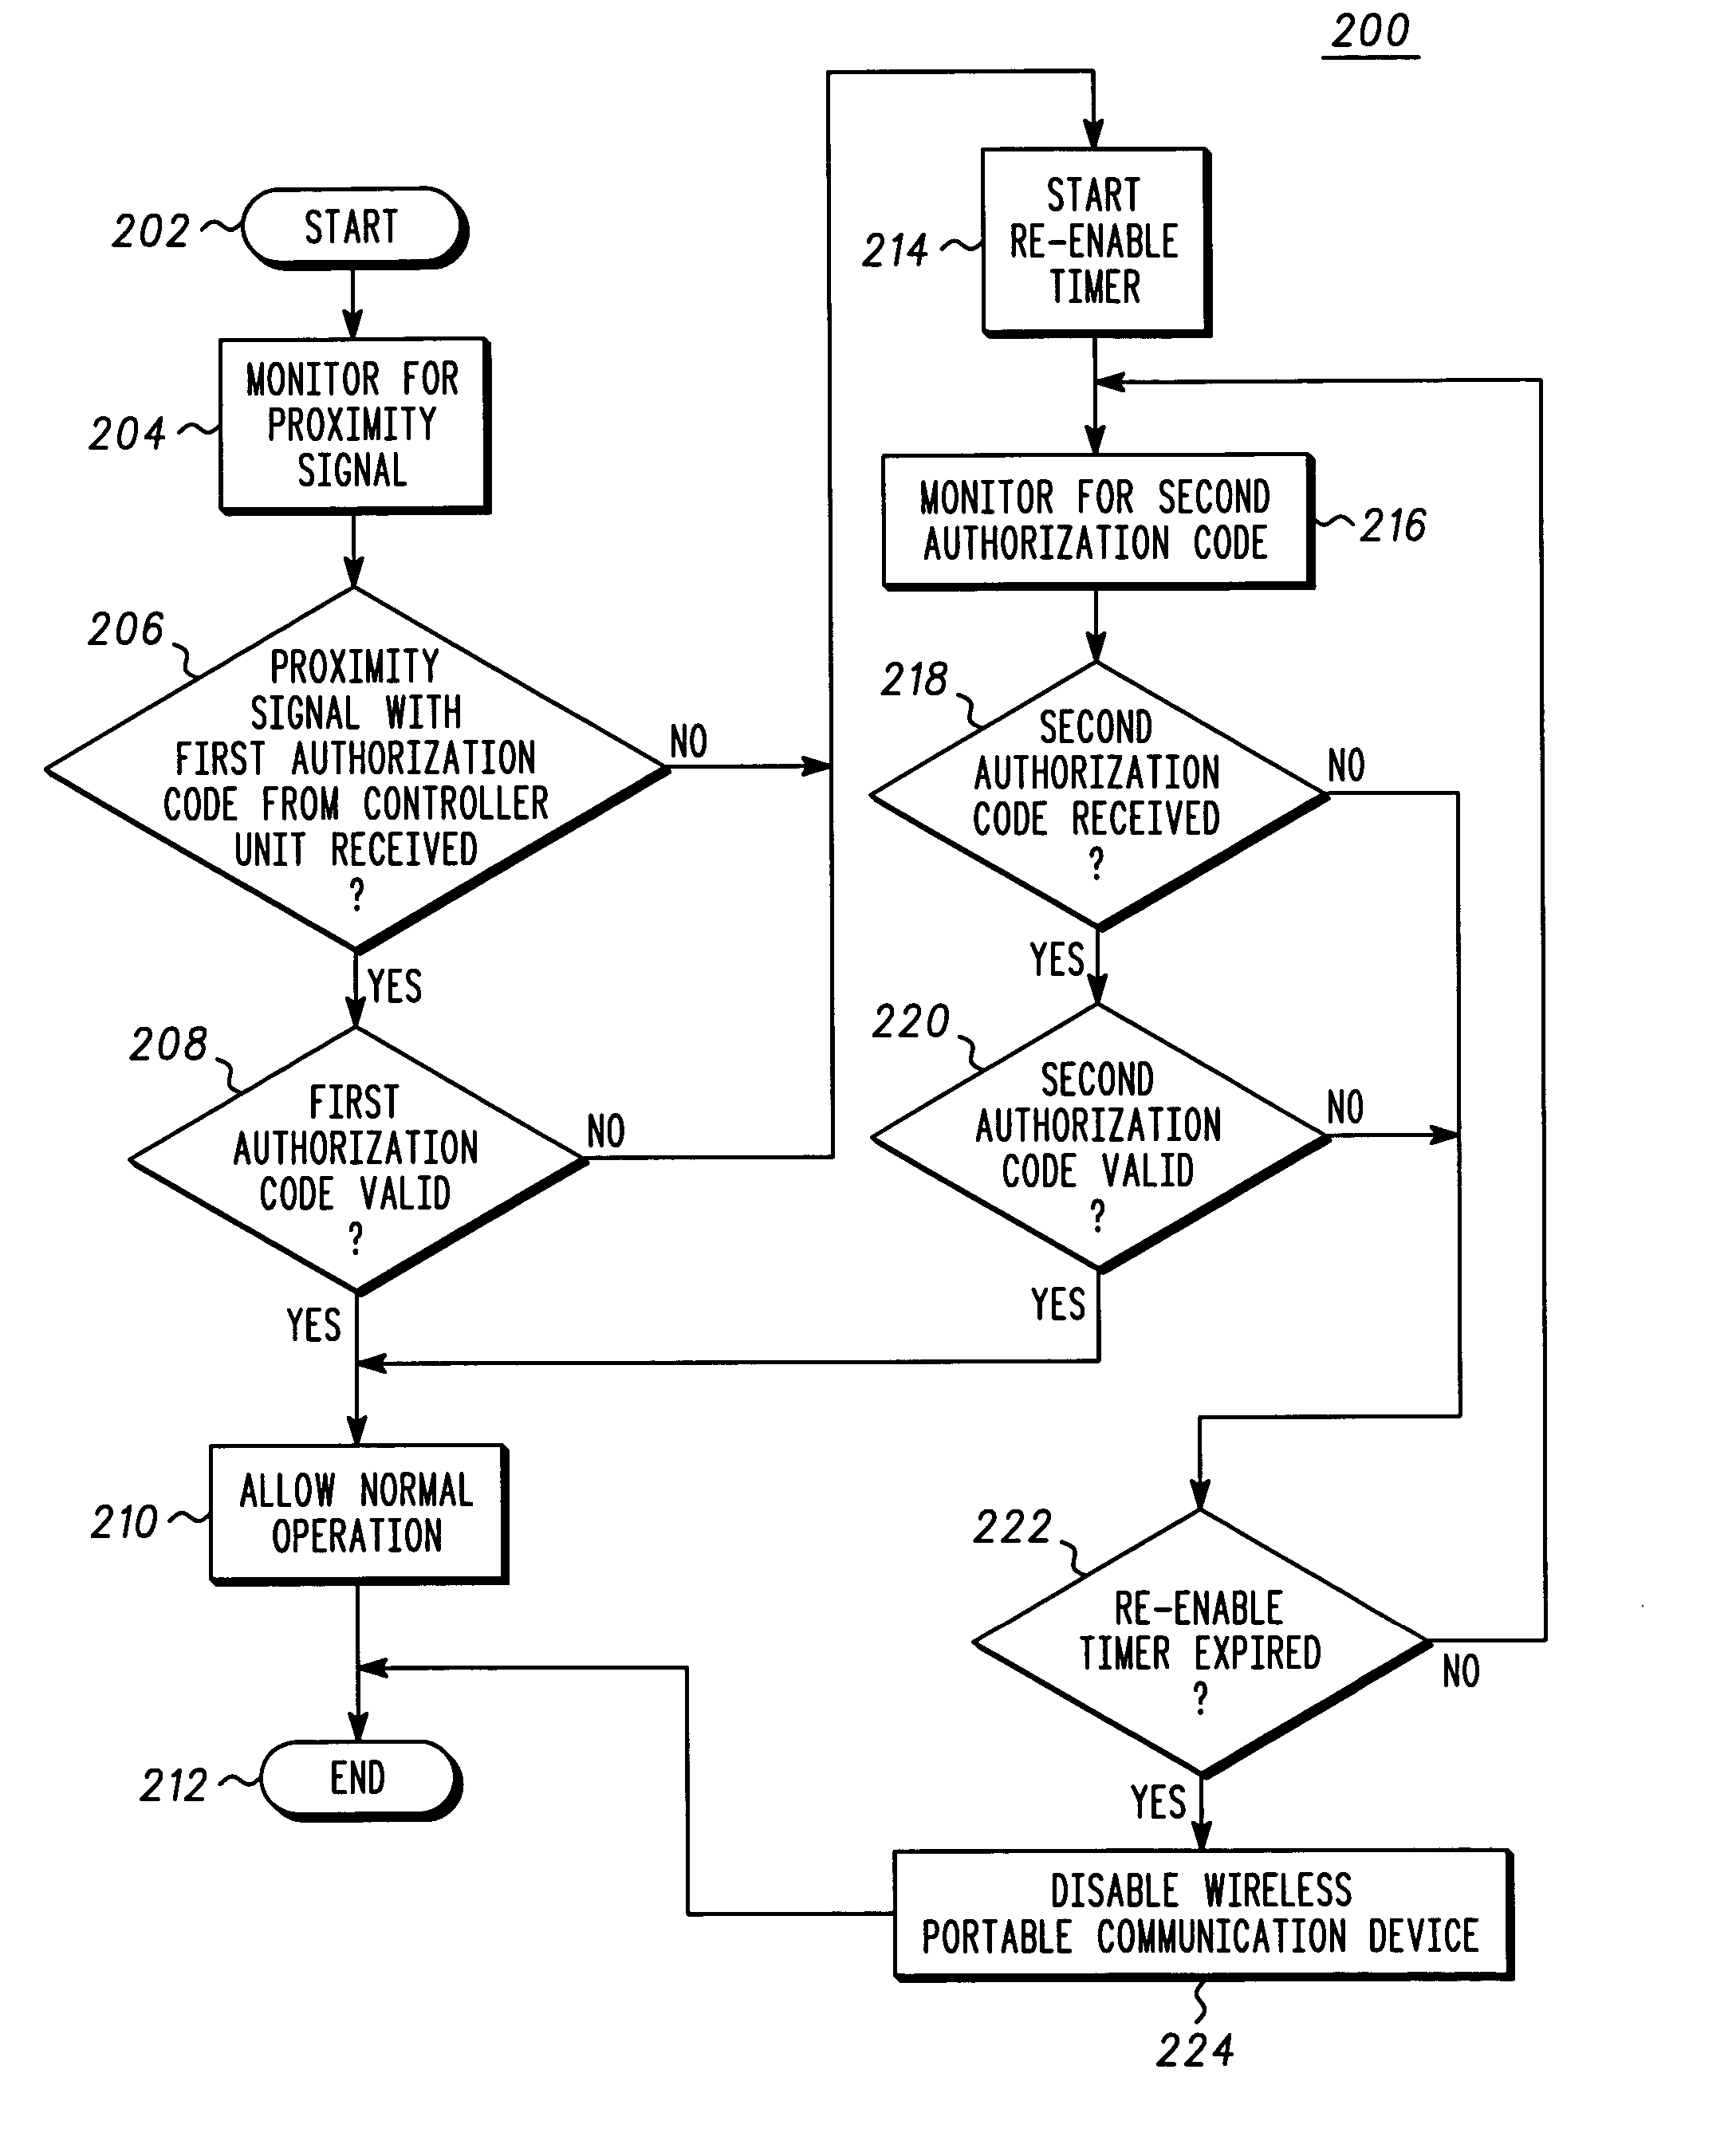 Method and apparatus for enabling a device by proximity